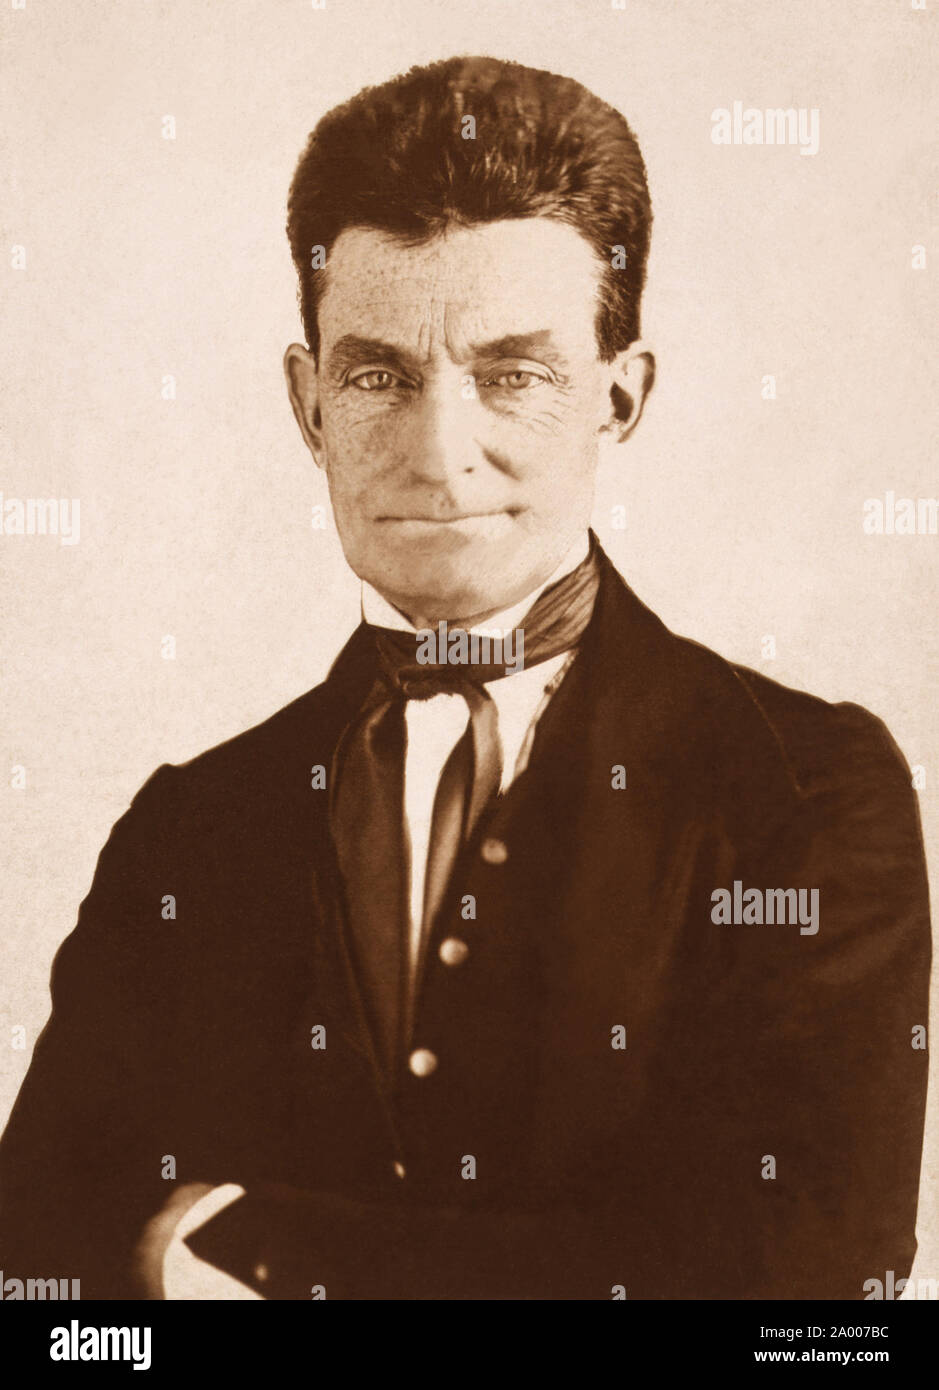 John Brown (1800-1859), American abolitionist who advocated the use of armed insurrection to overthrow the institution of slavery in the United States, from an 1846 or 1847 daguerreotype by African-American photographer Augustus Washington which was later reprinted as a cabinet card by Levin C. Handy. Stock Photo